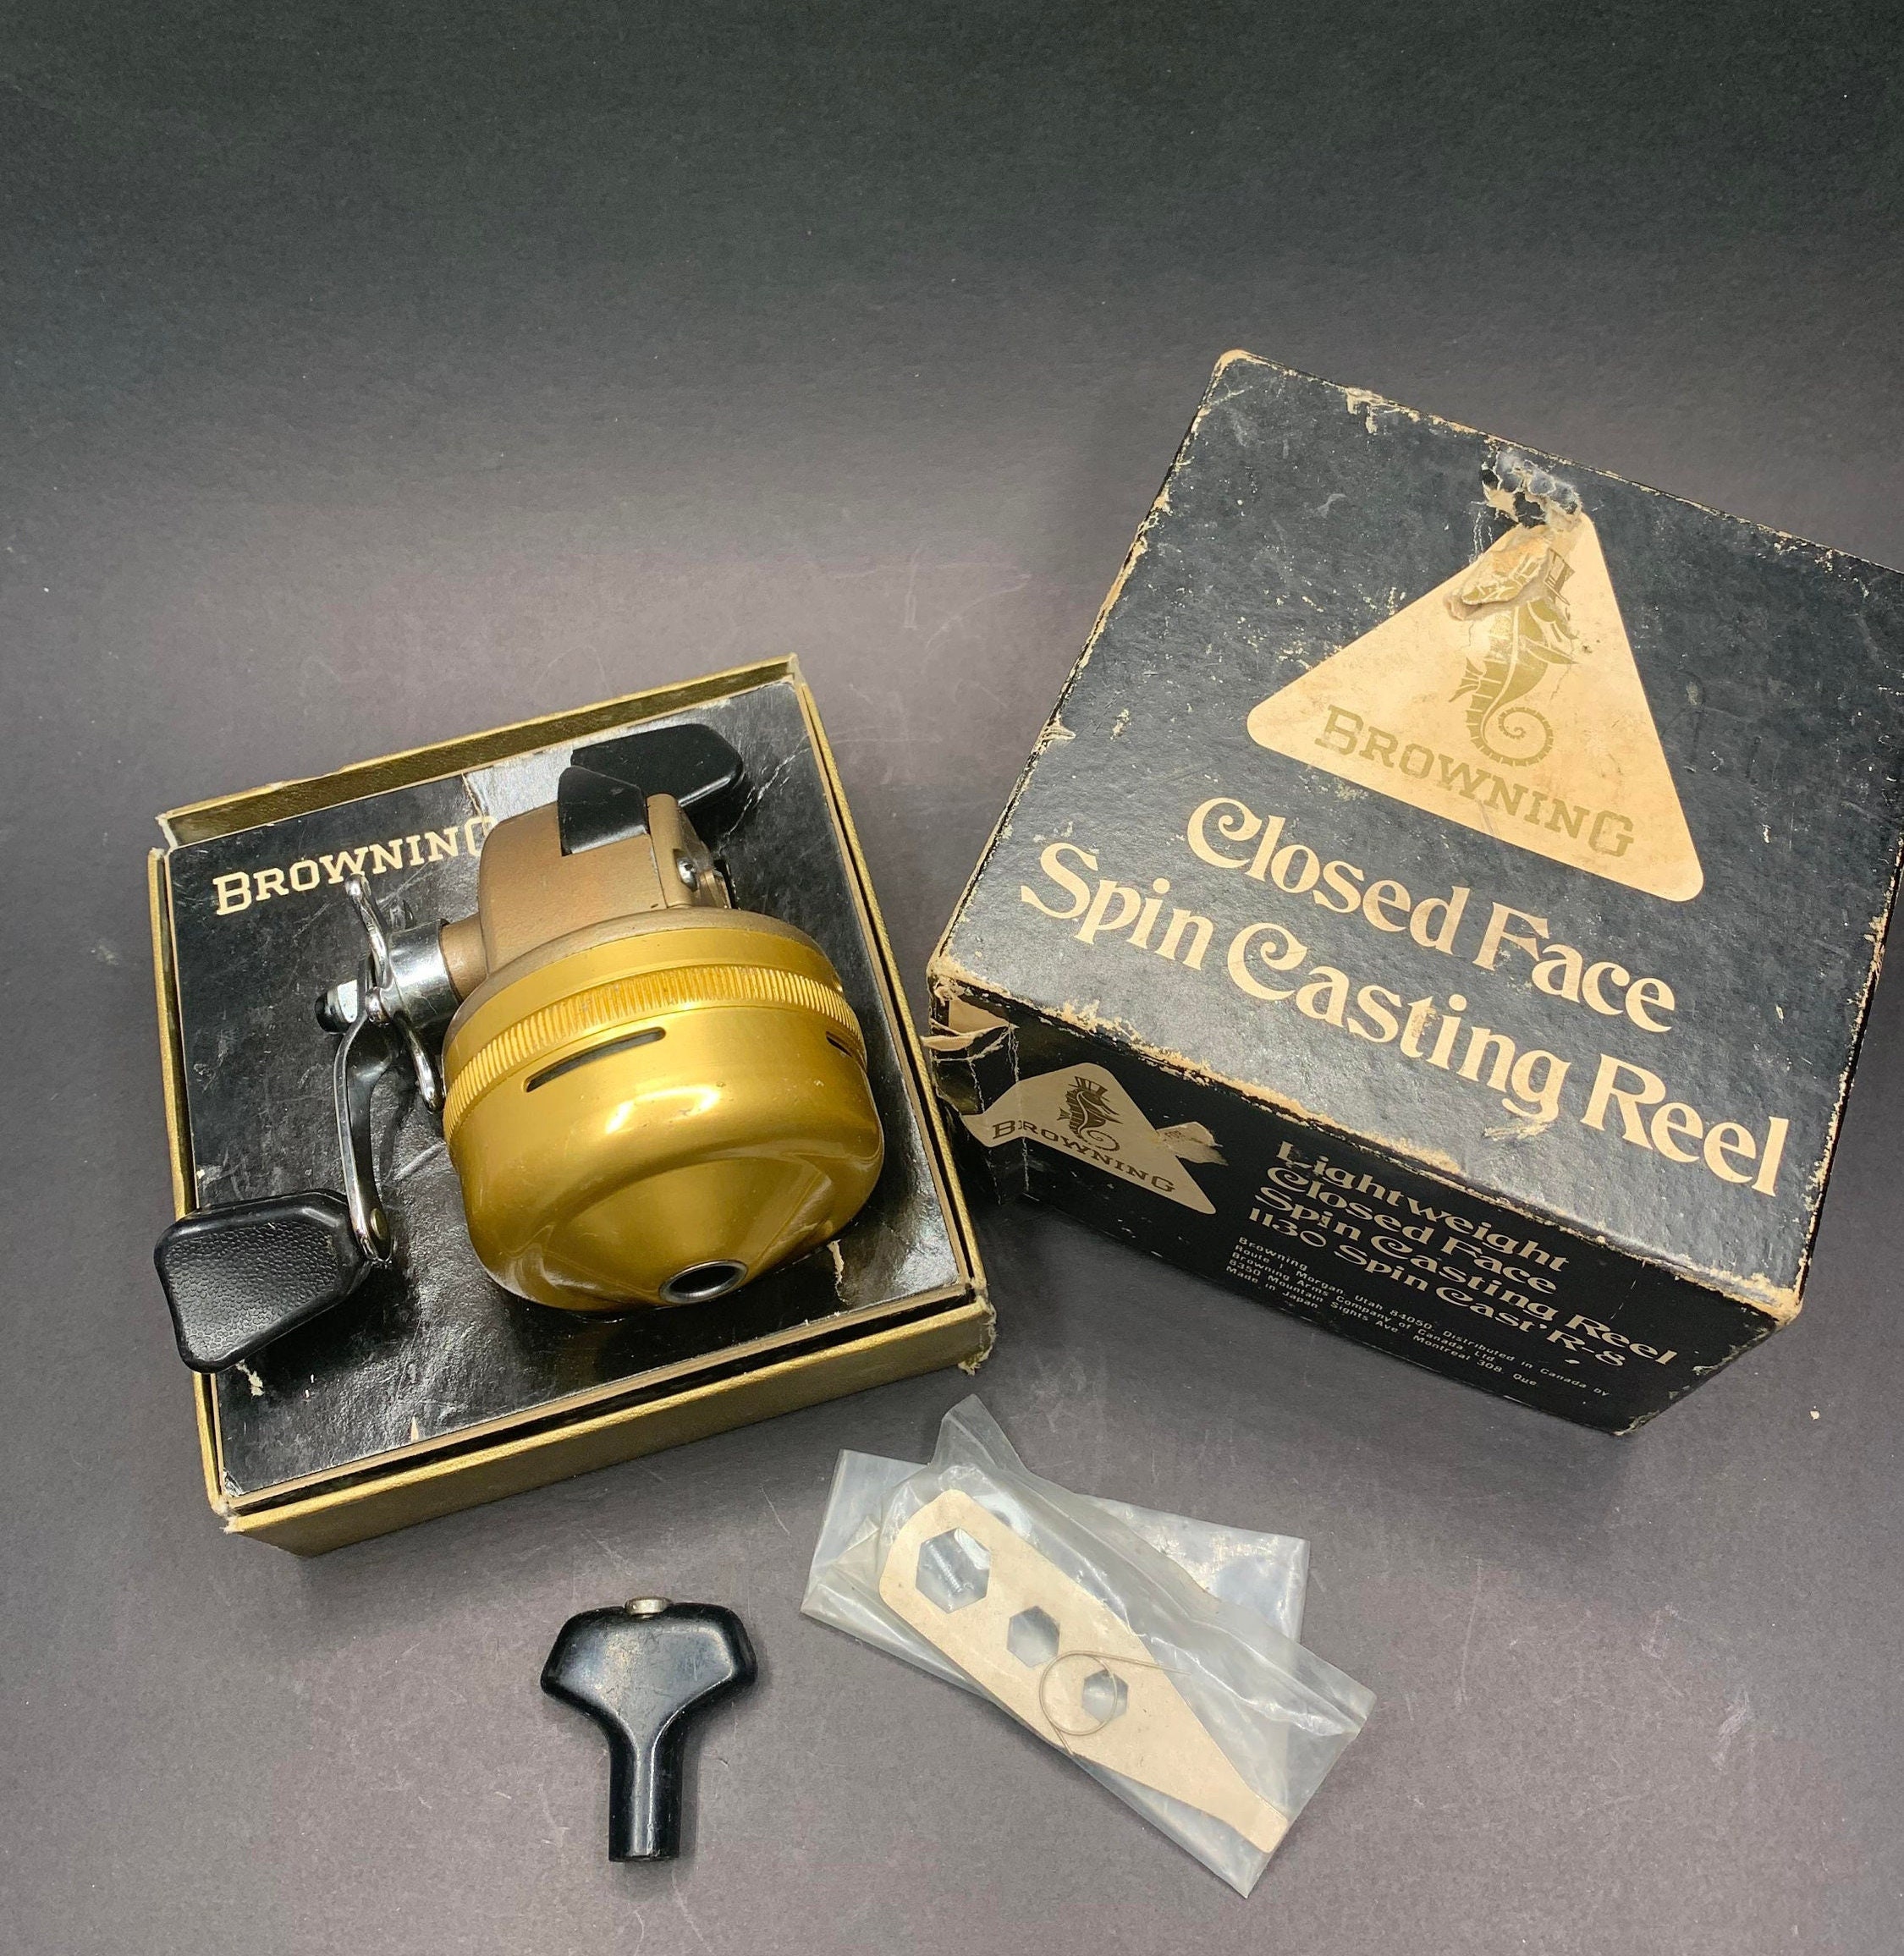 New Old Stock Browning No. 1130 Spin Cast R-8 Fishing Reel With Box and  Extras Great Gift Idea 